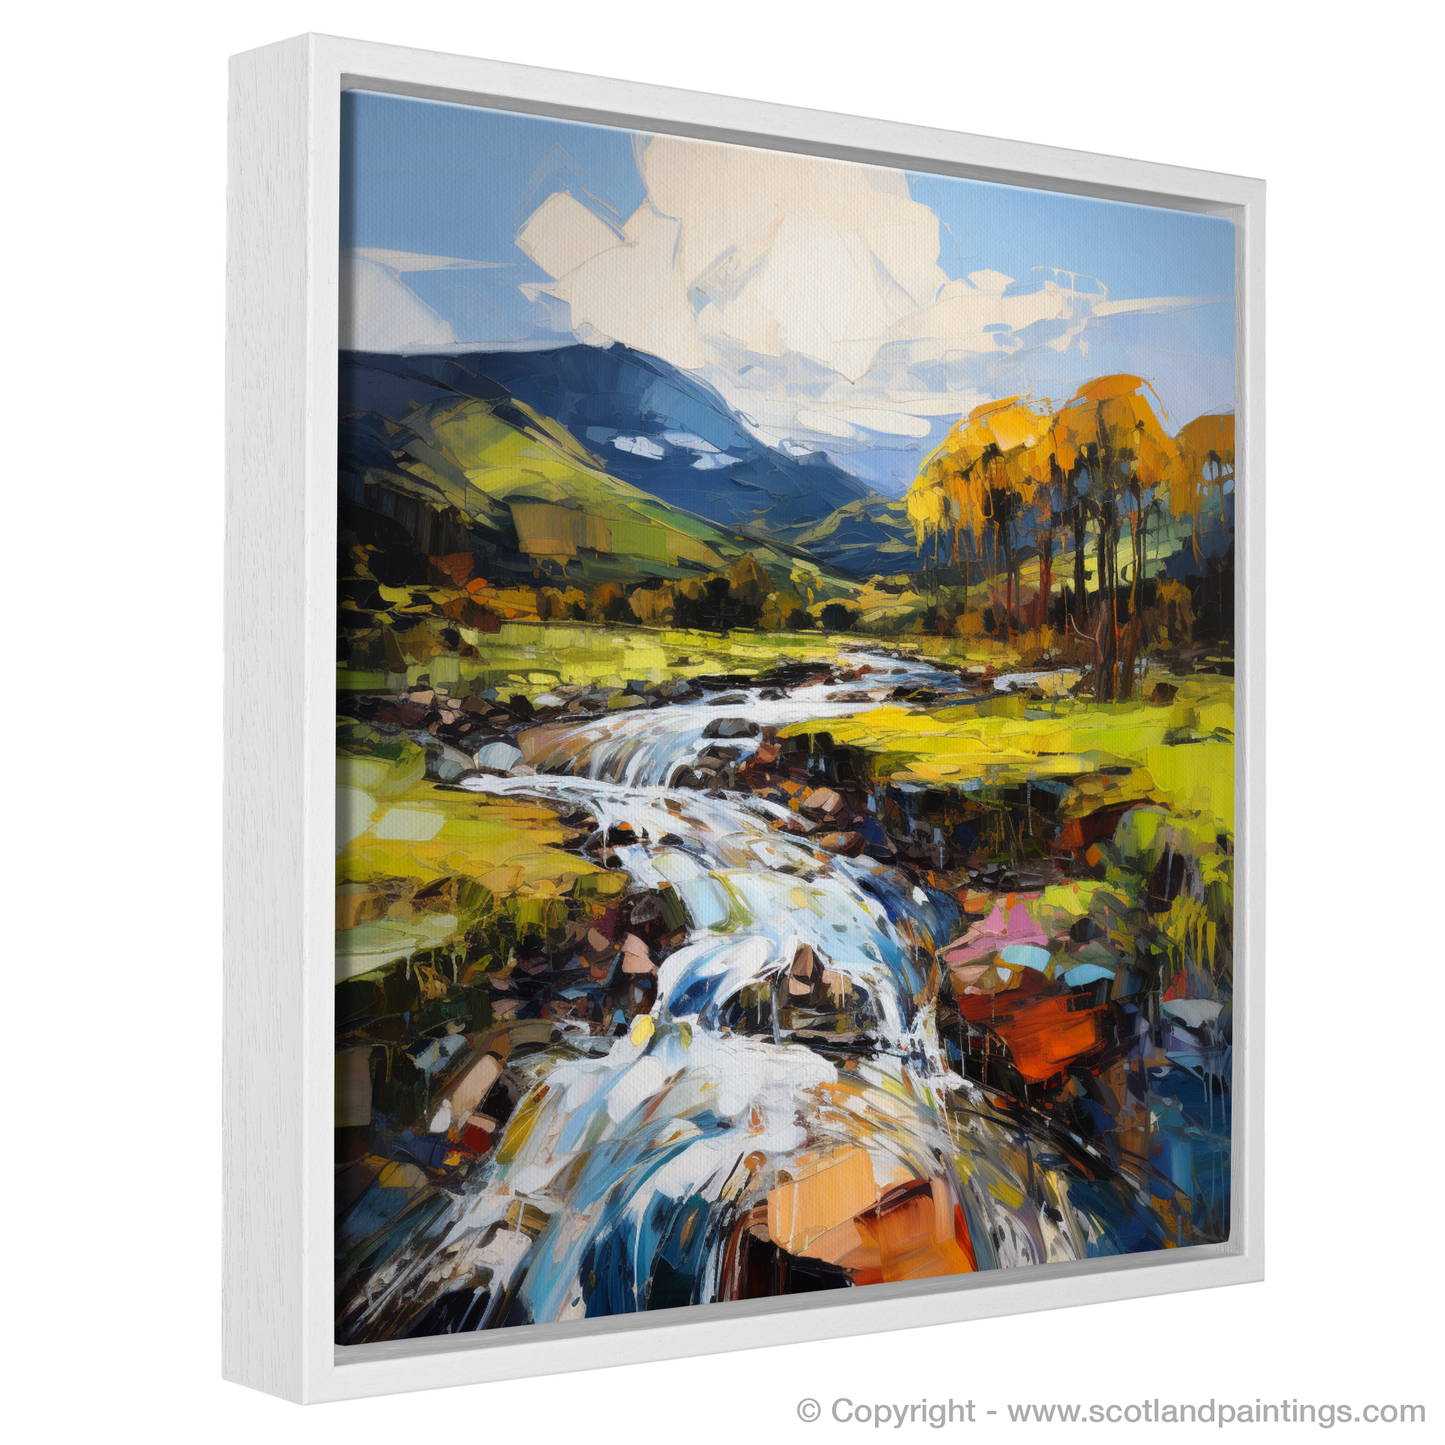 Painting and Art Print of River Carron, Ross-shire entitled "Carron's Vibrant Flow: An Expressionist Ode to Ross-shire".